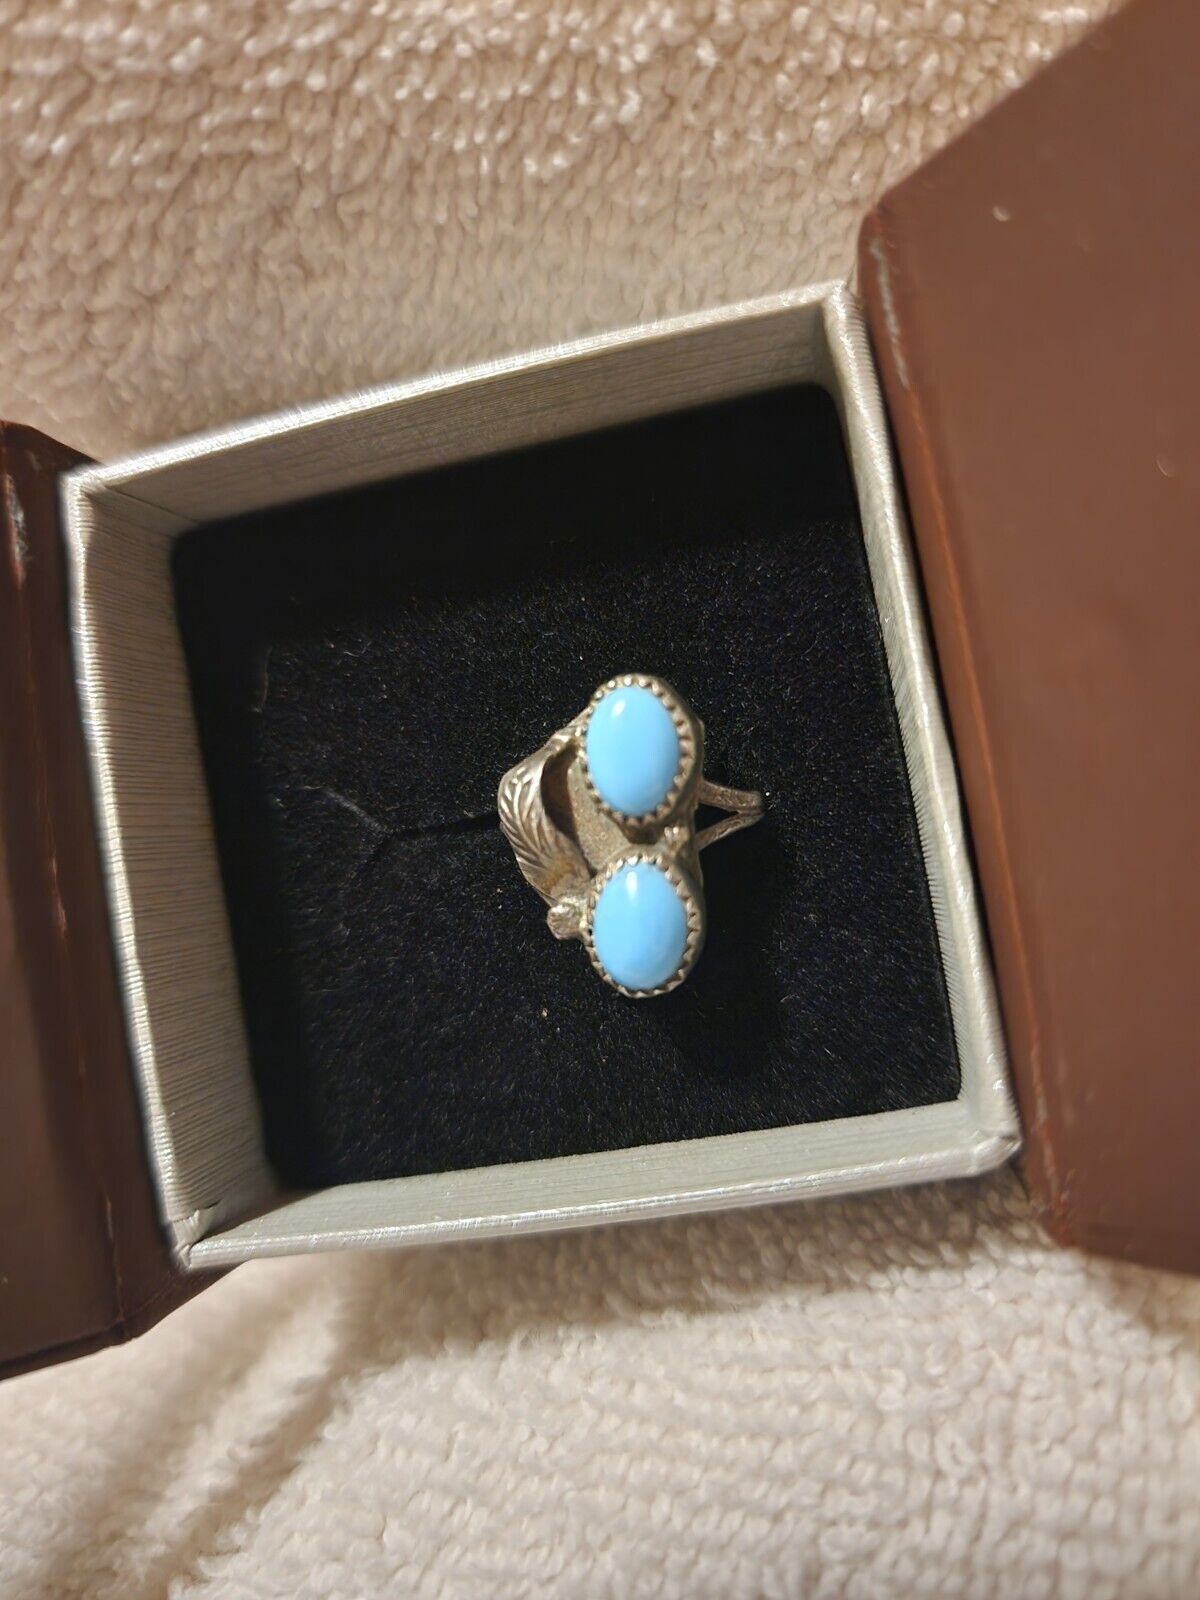 Petite Vintage Native American Sterling Silver And Turquoise Ring Size 5.75